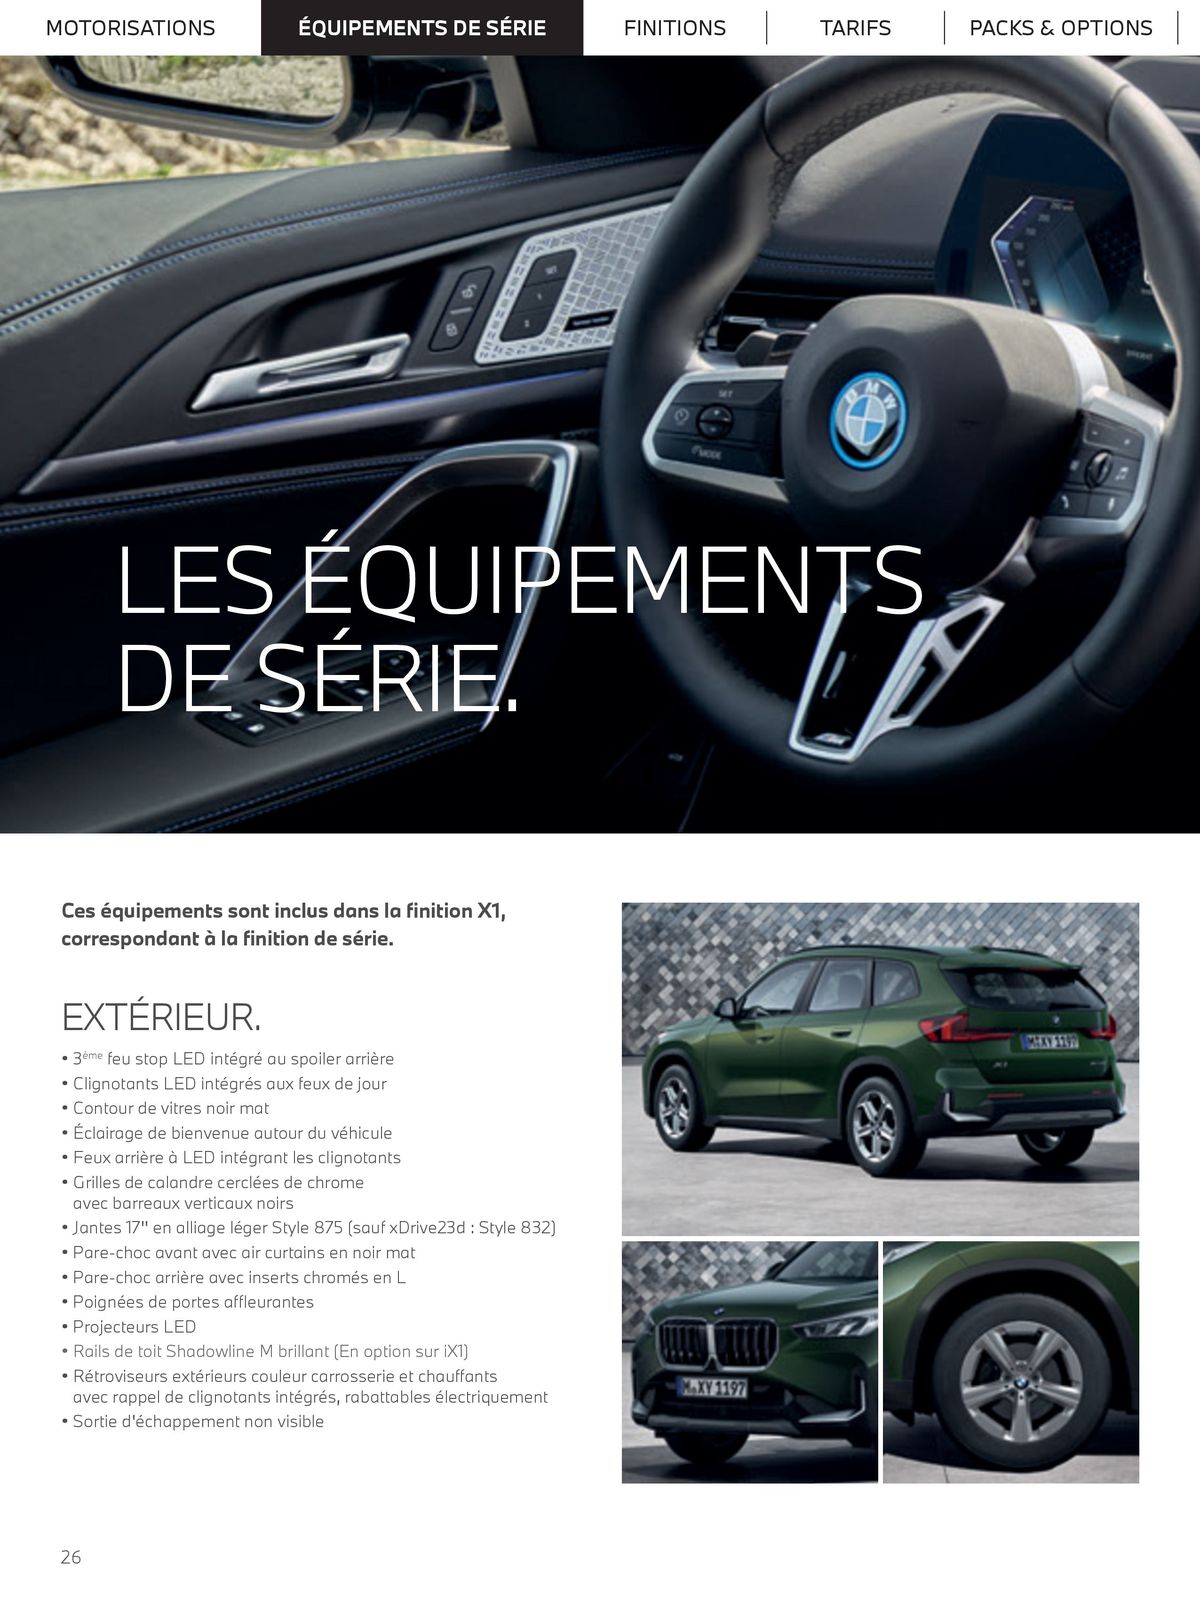 Catalogue THE NEW X1, page 00026